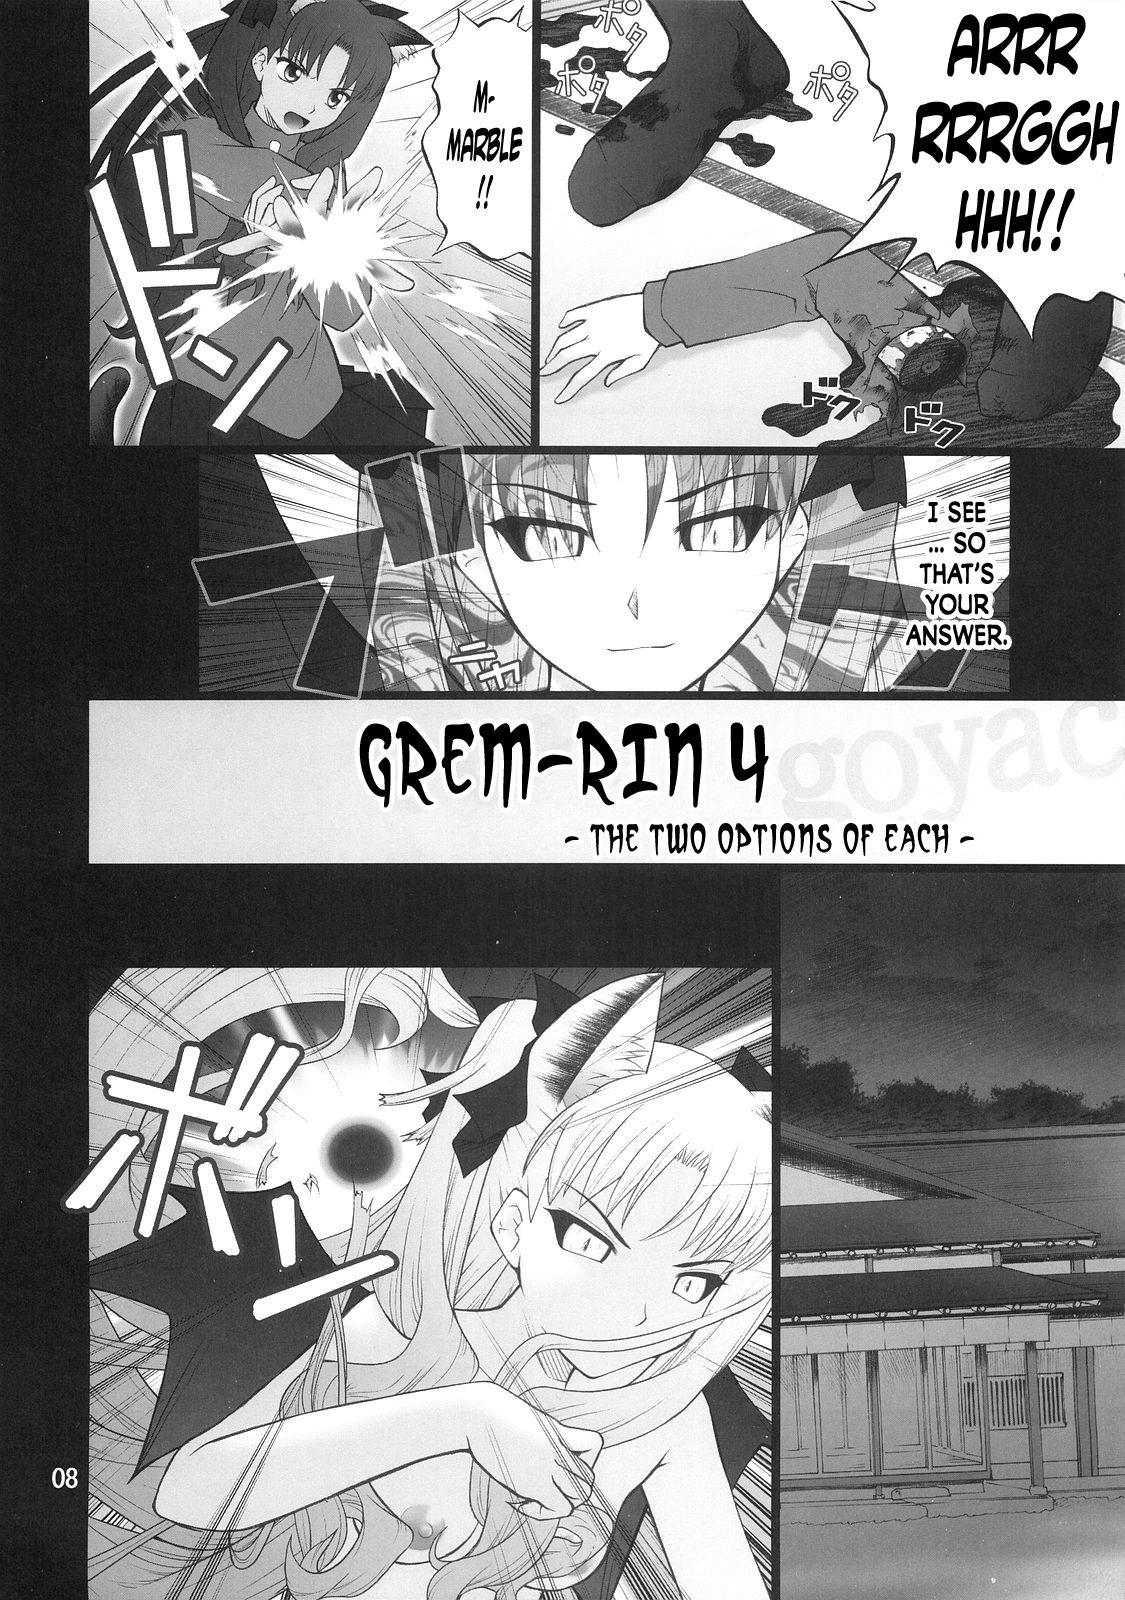 Sensual Grem-Rin 4 - Fate stay night Oil - Page 7